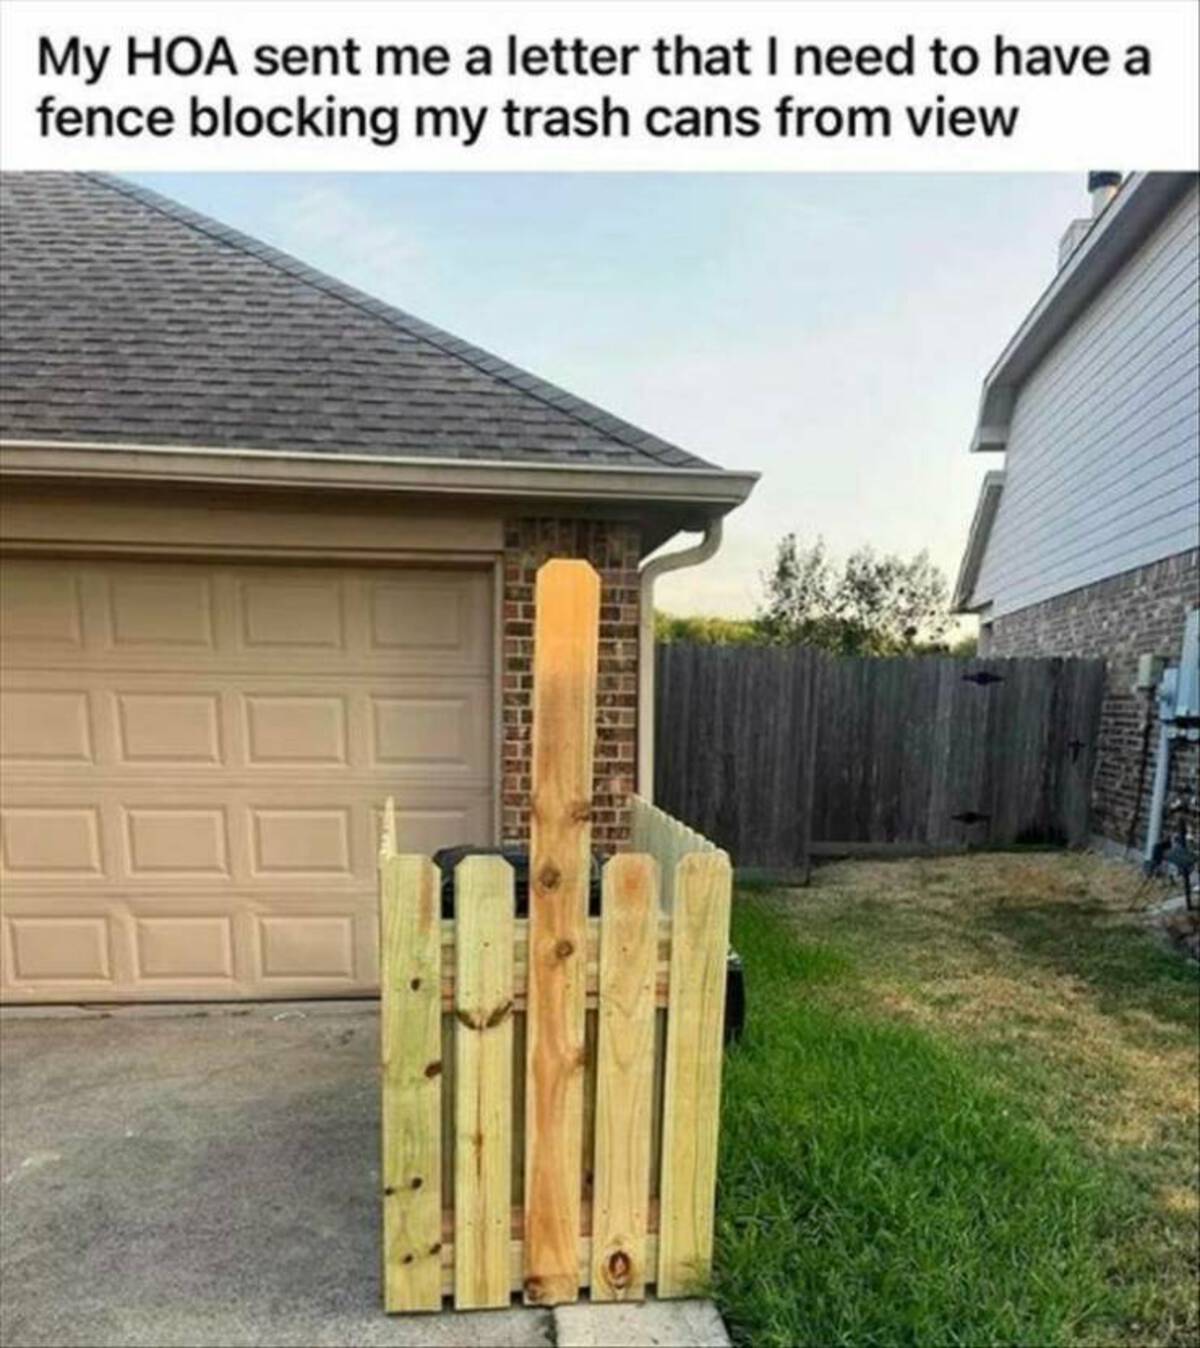 hoa garbage can fence - My Hoa sent me a letter that I need to have a fence blocking my trash cans from view